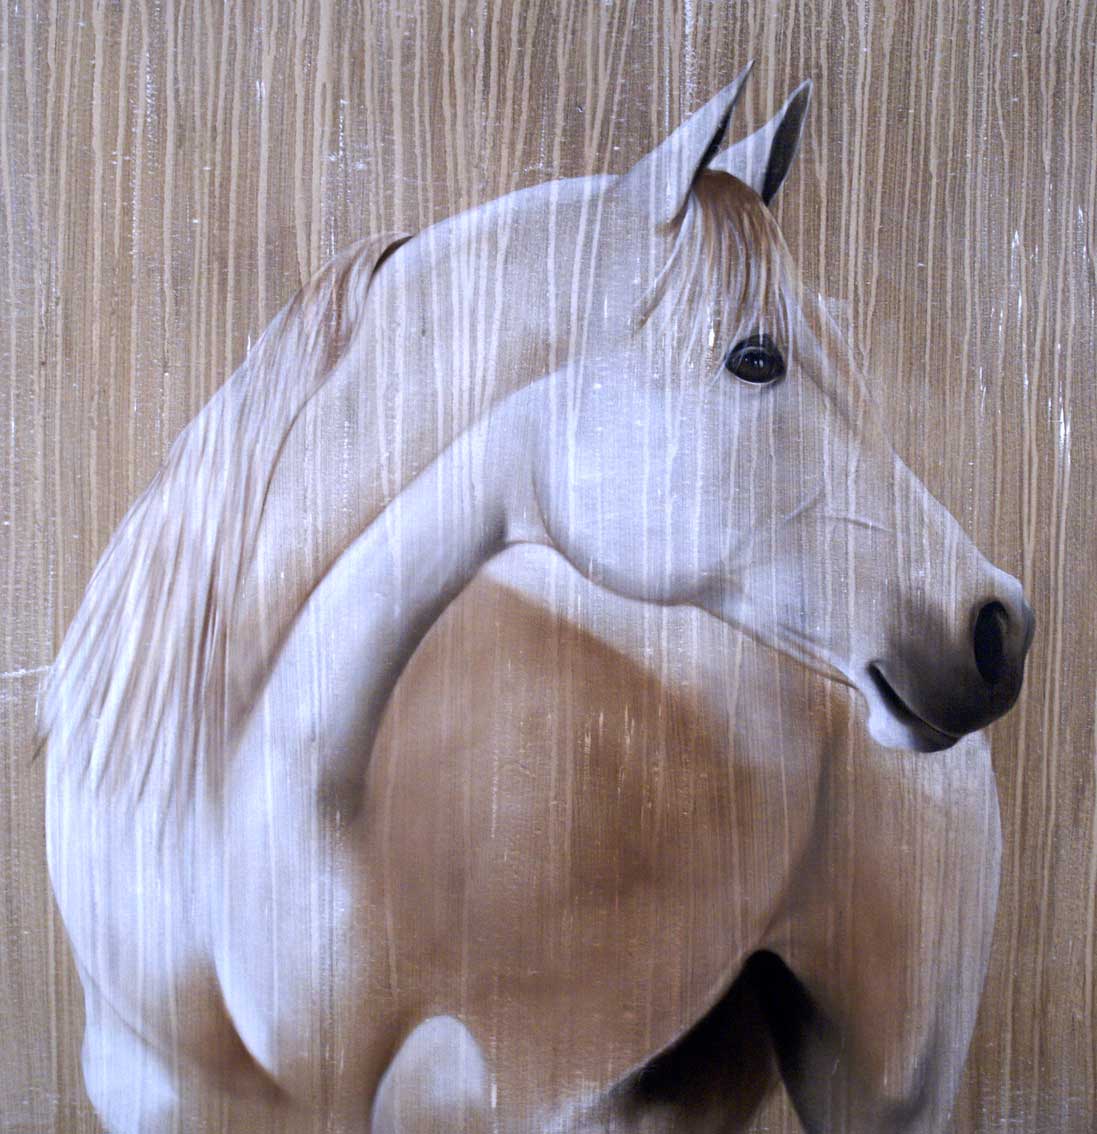 Pur-Sang-Arabe arabian-thoroughbred-horse Thierry Bisch Contemporary painter animals painting art  nature biodiversity conservation 